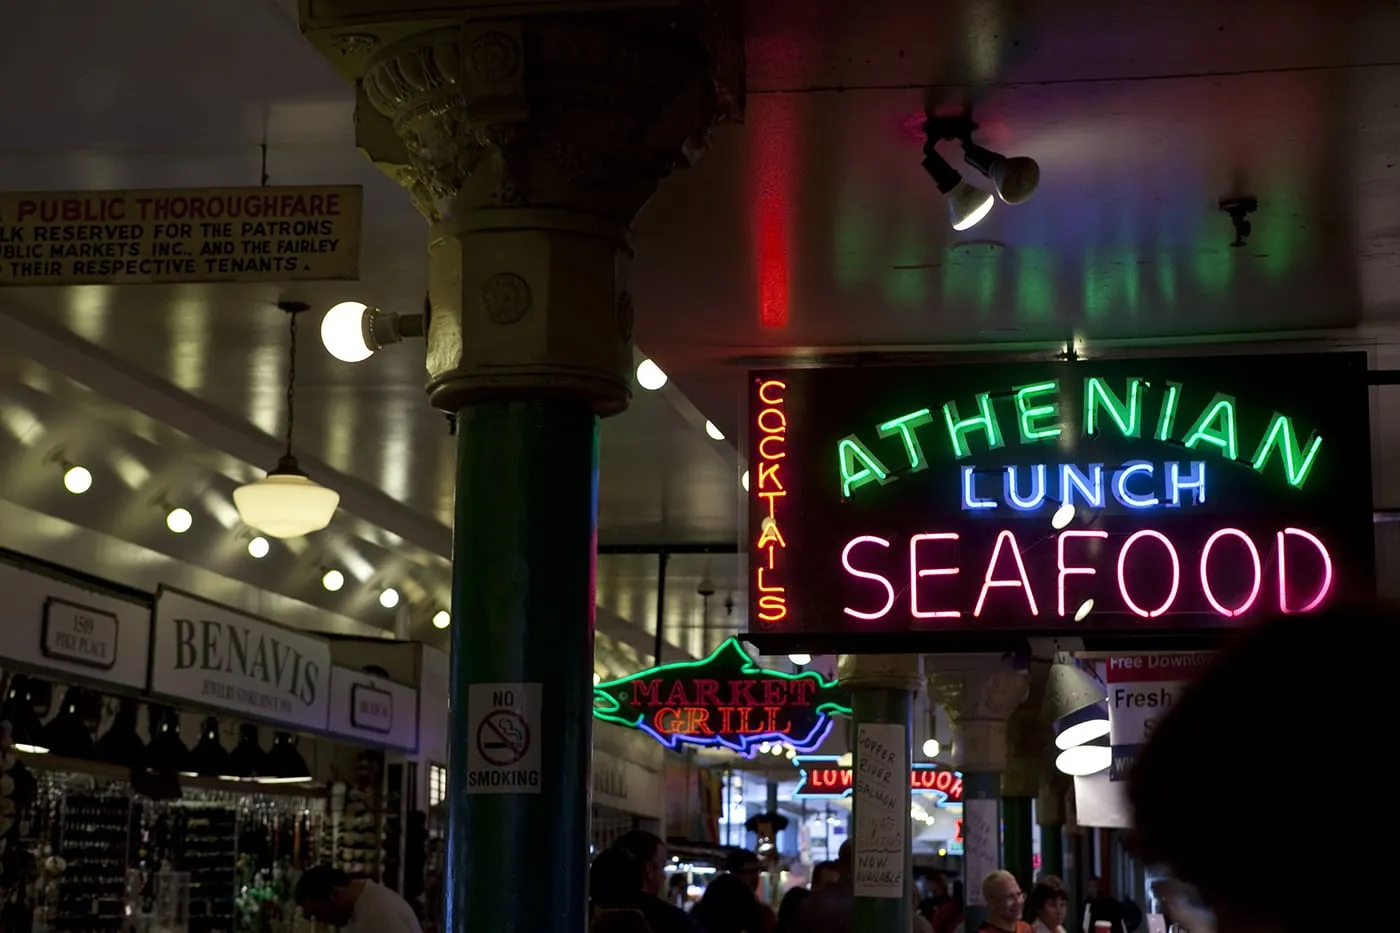 Athenian Lunch Seafood sign at Pike Place Market in Seattle, Washington.